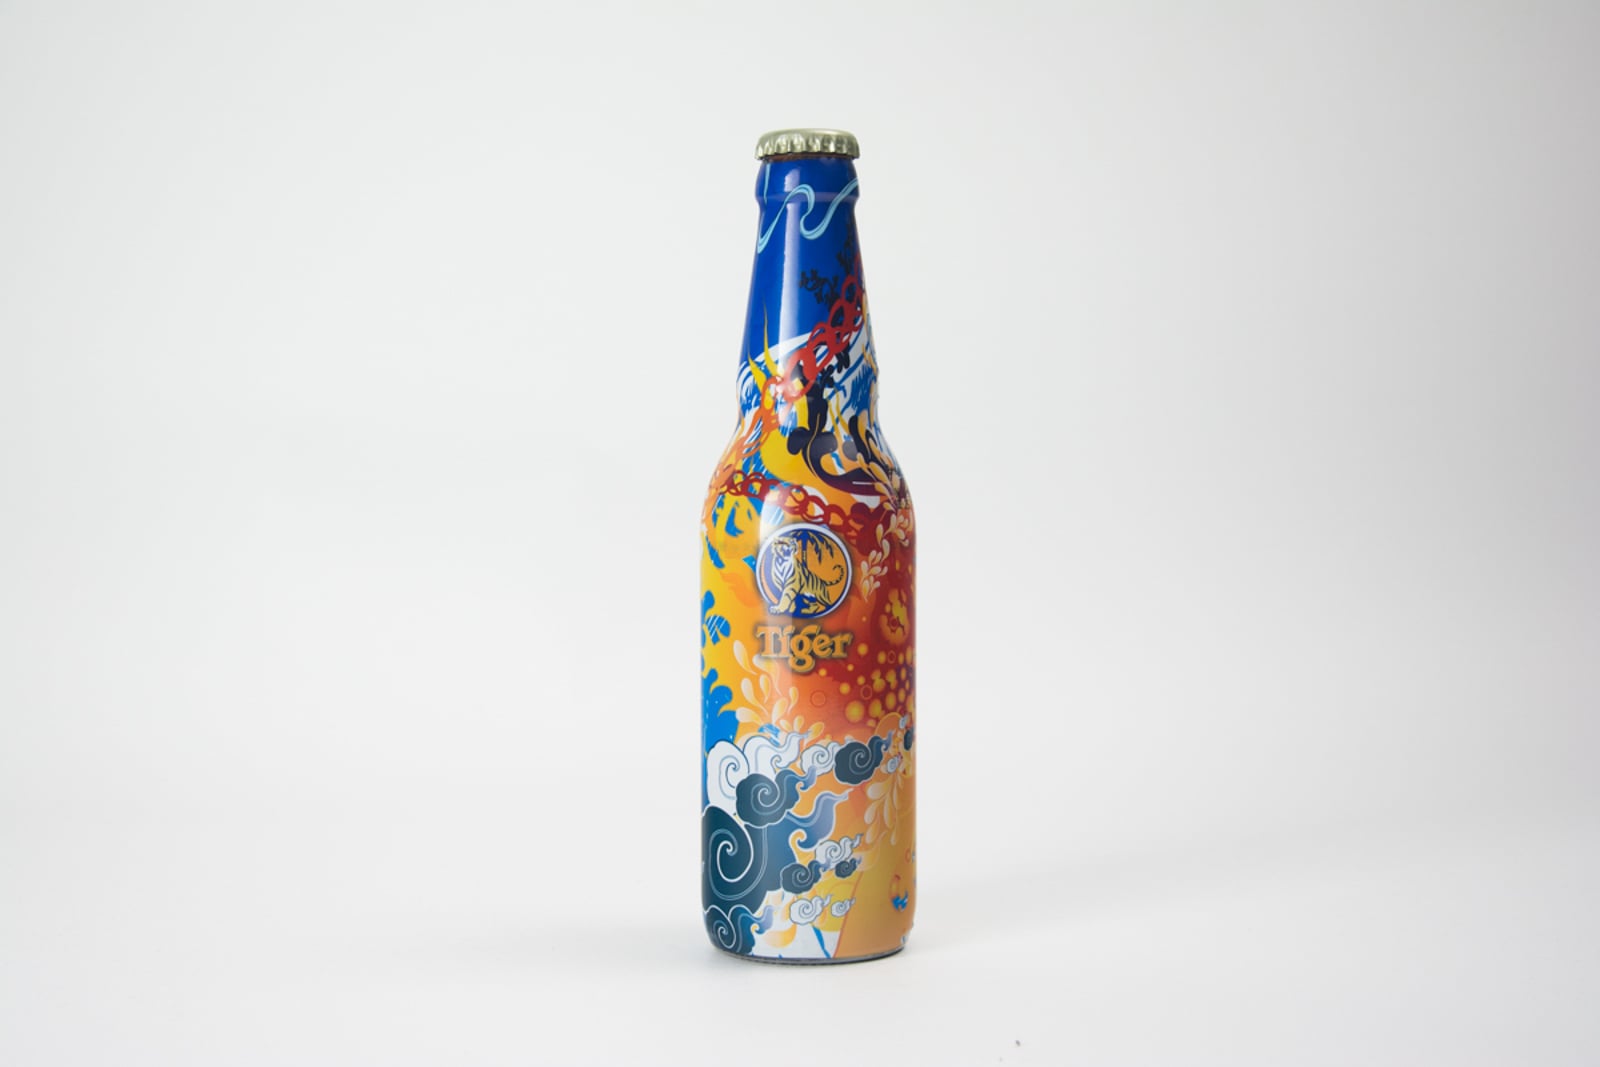 Tiger Beer Limited Edition Bottle Designed By Bangkok Outfit 8E88, 330ml